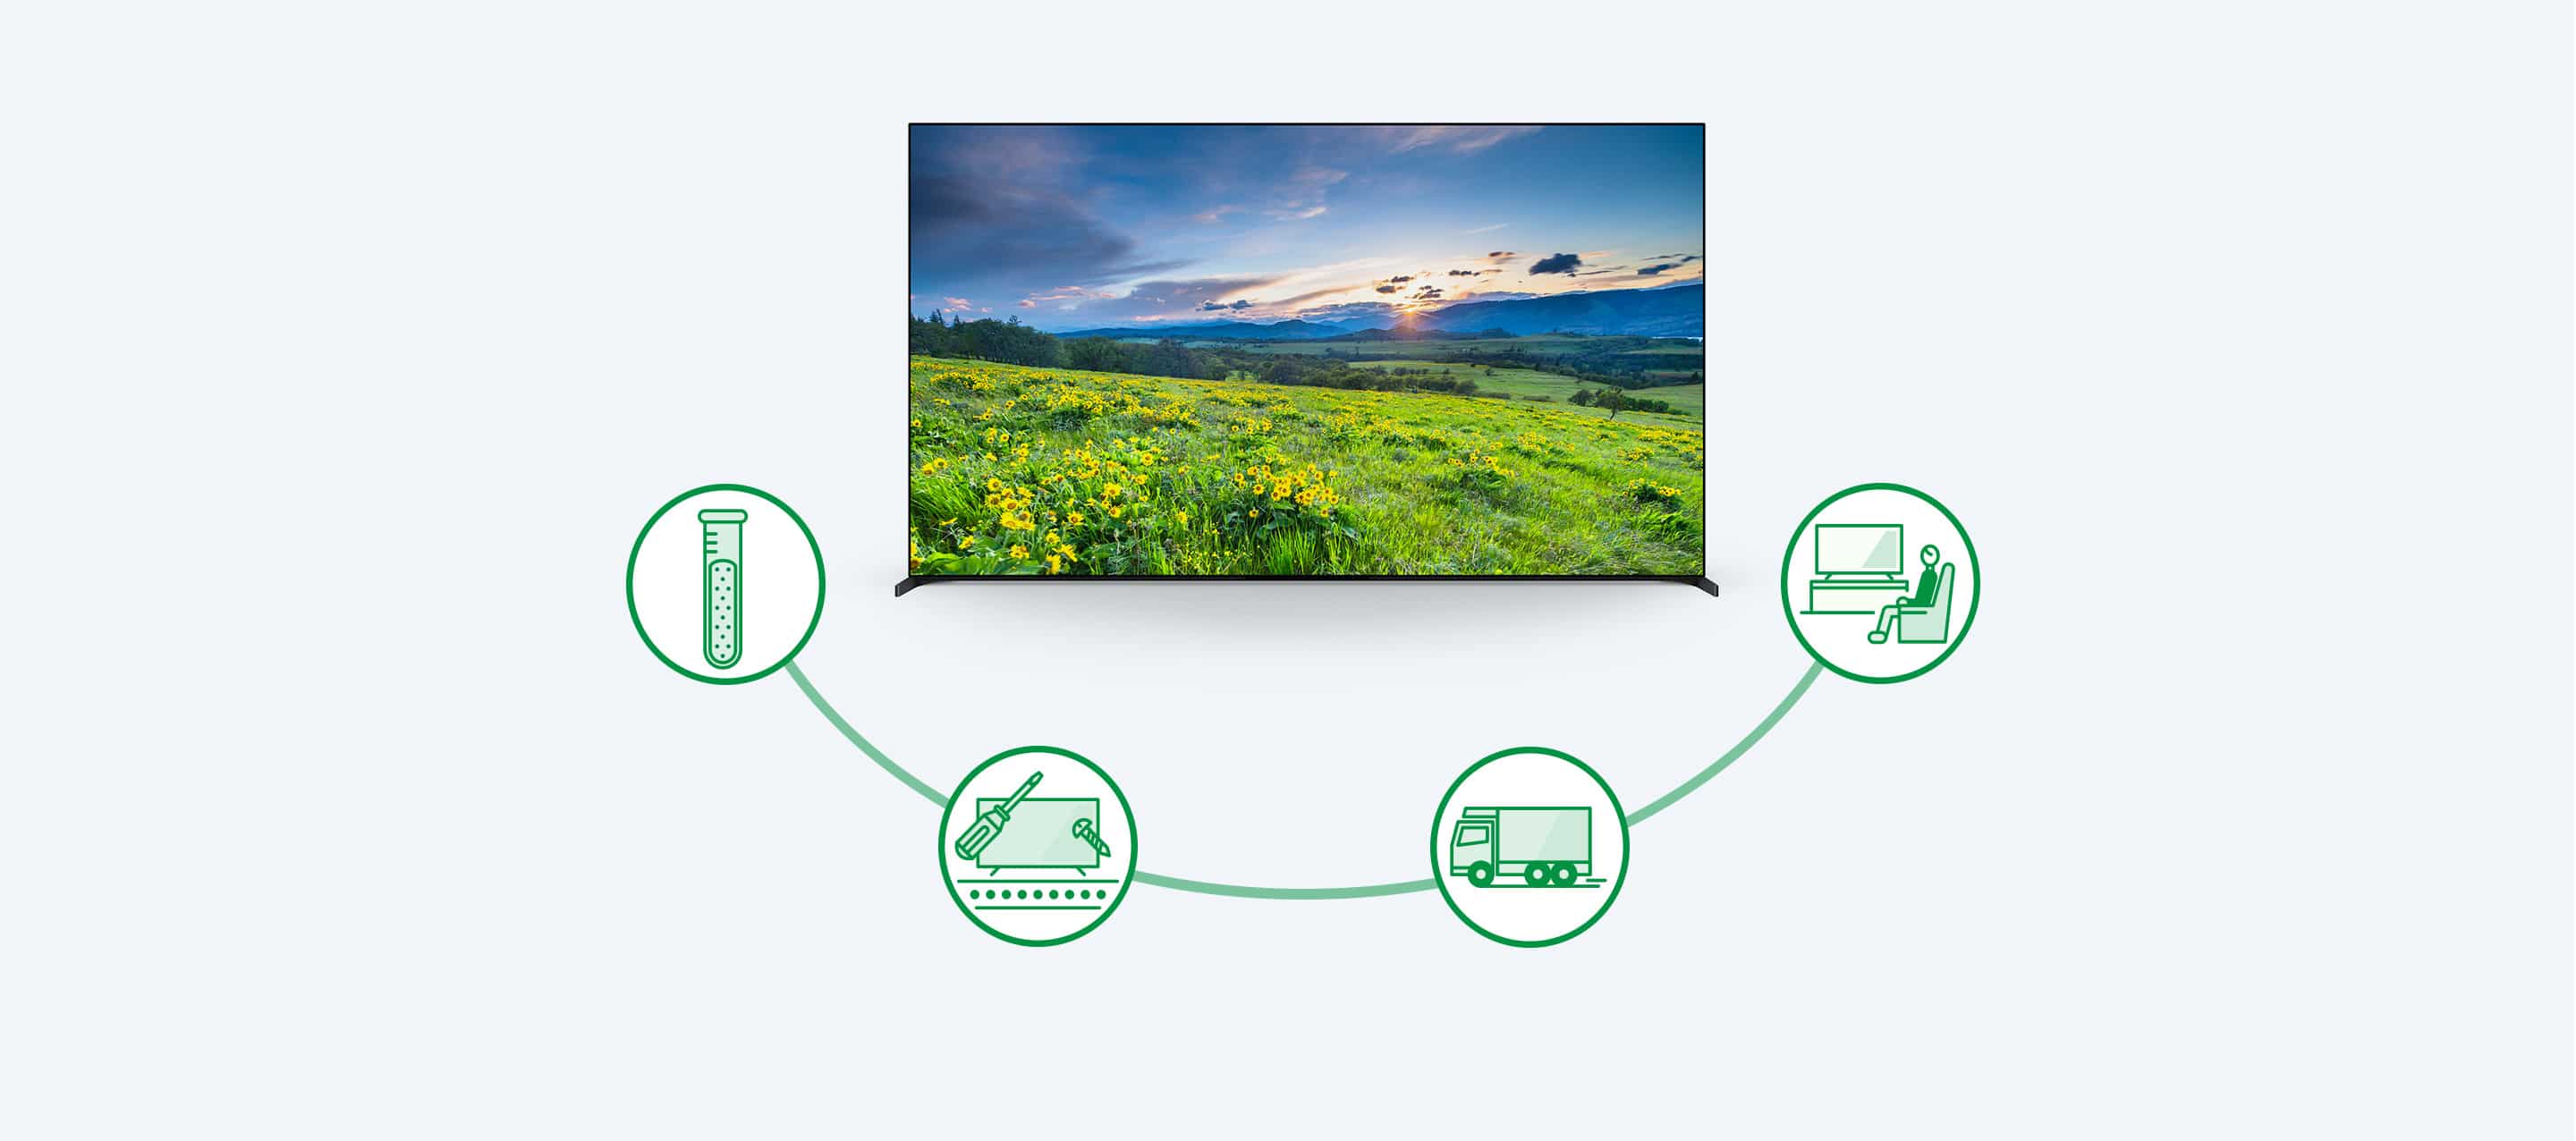 Sony BRAVIA professional display and workplace sustainability